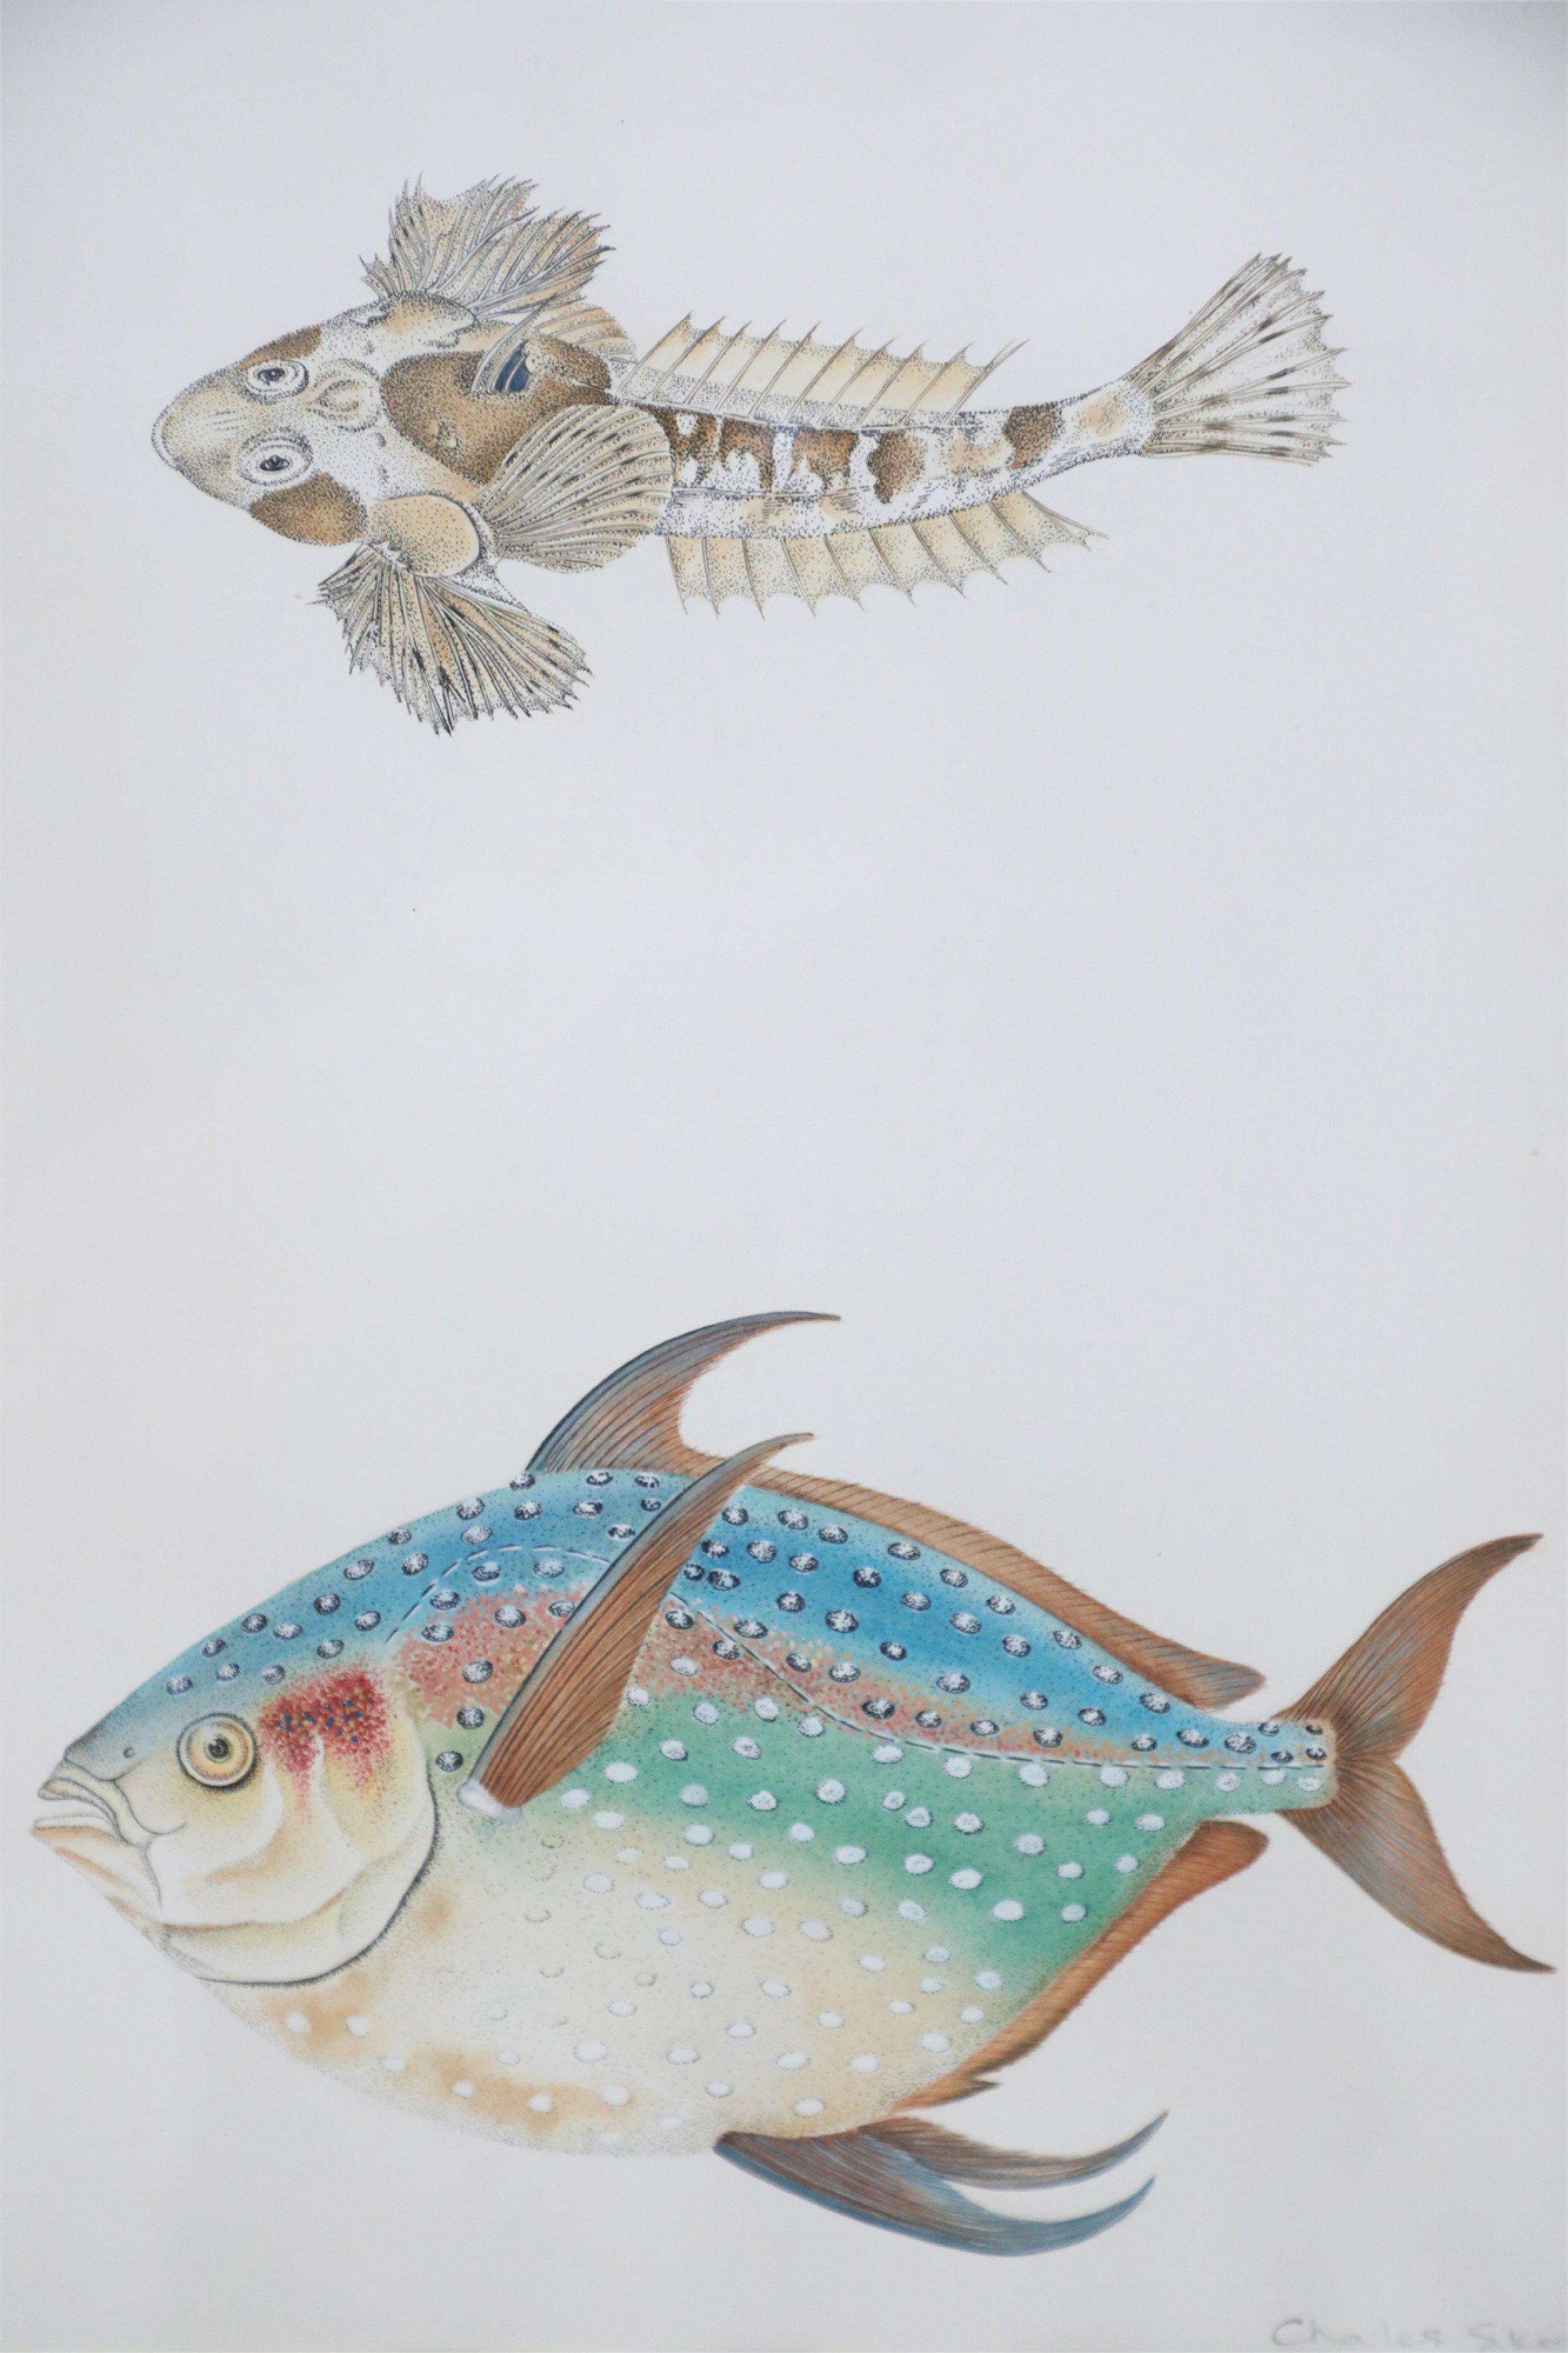 Mid-century lithograph of two tropical fish, one small and brown, one larger and multi-colored in a beige mat with gold bevel and a rectangular giltwood frame. (signed, Charles Skora, #9).